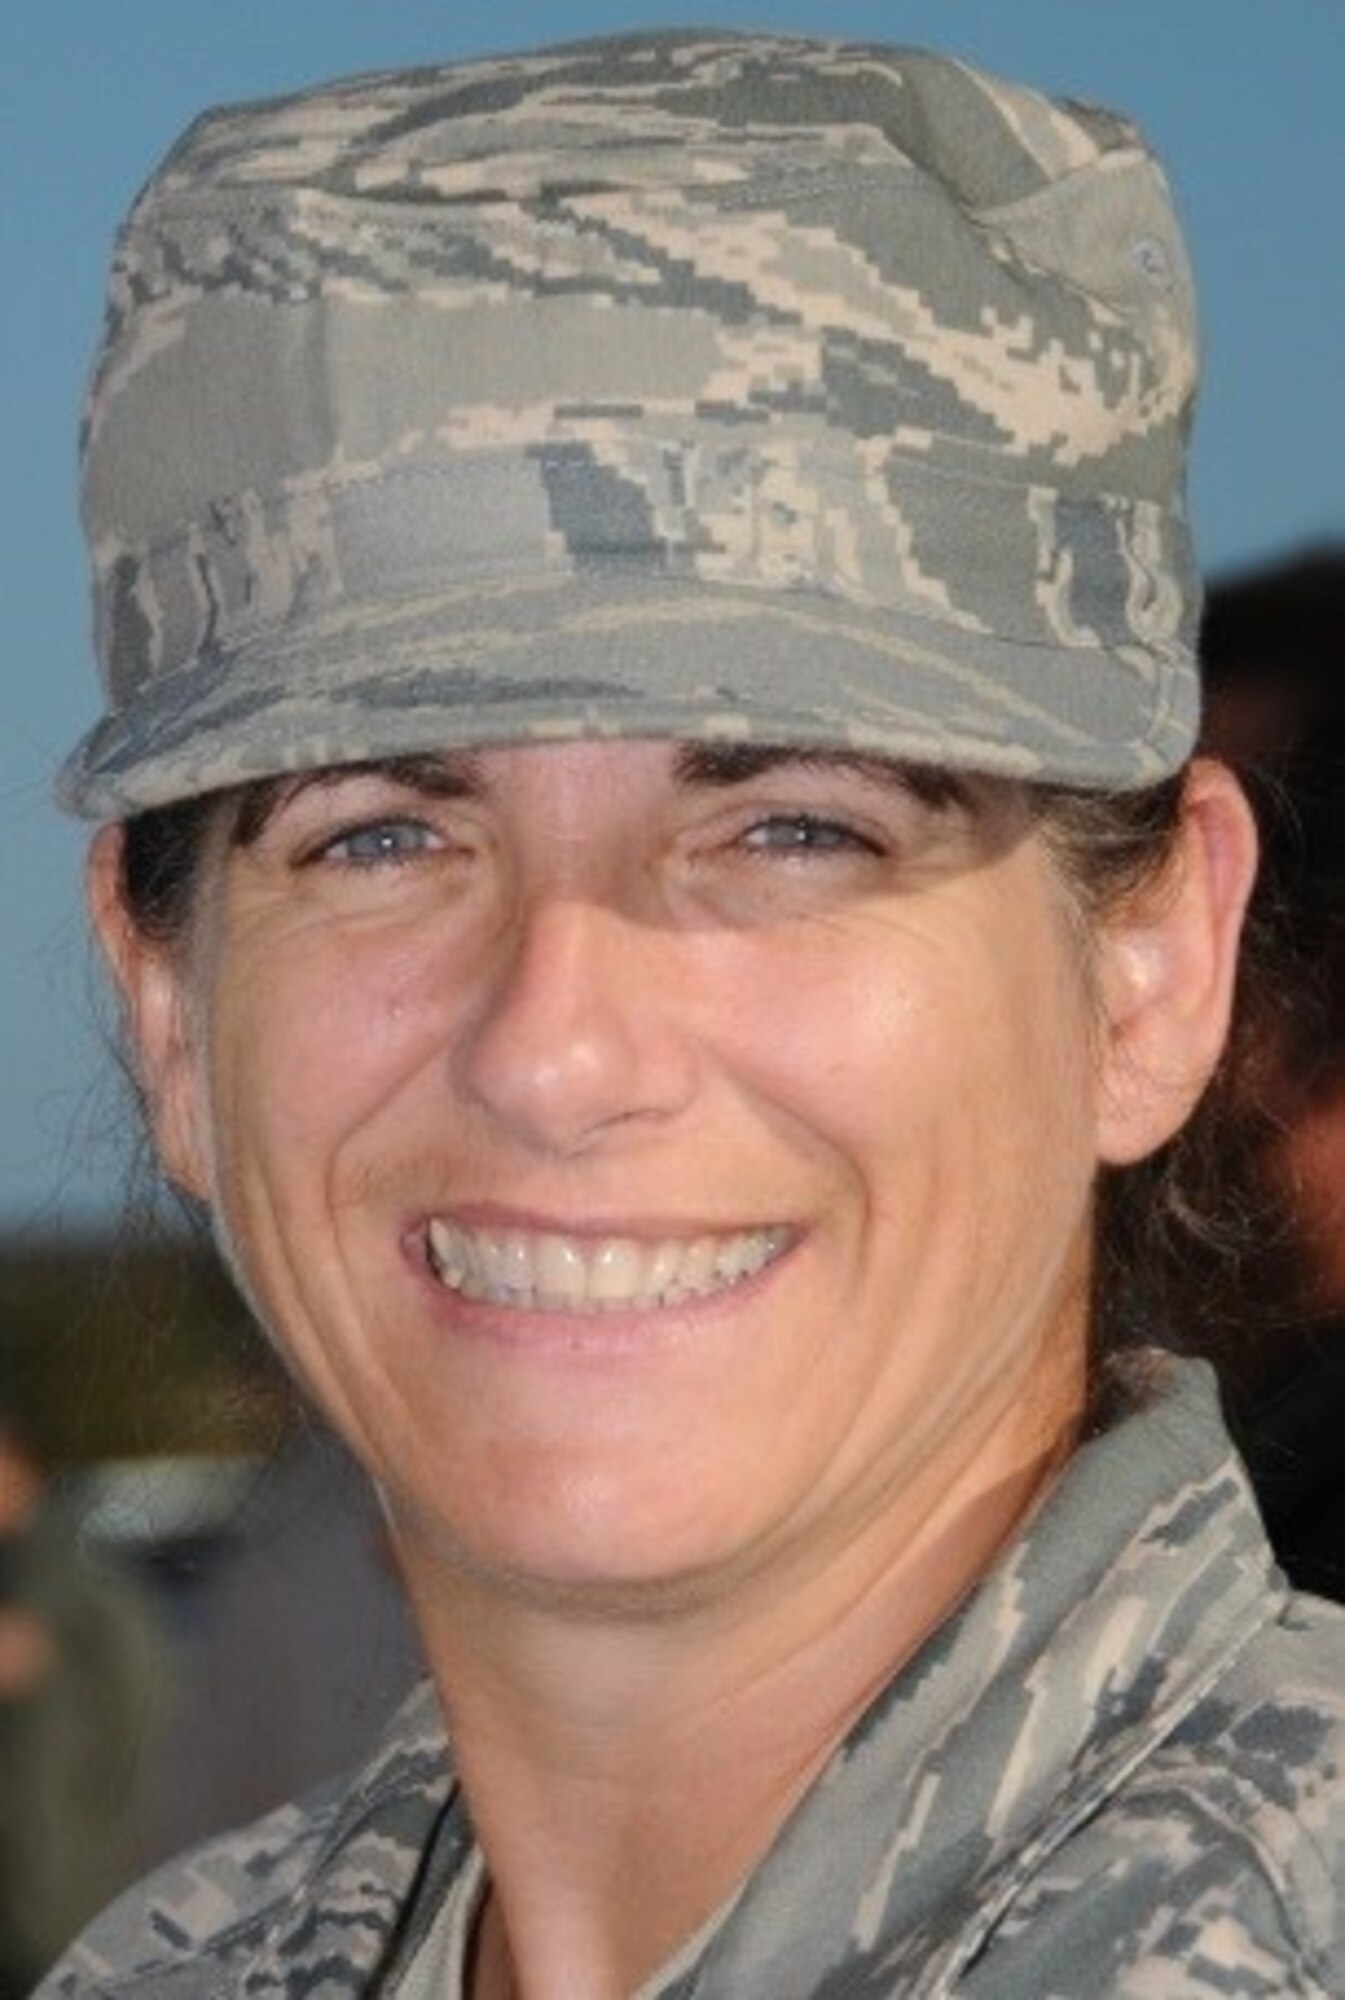 Master Sgt. Katherine Wheelock is the engine manager for the 403rd Maintenance Group, Keesler Air Force Base, Mississippi